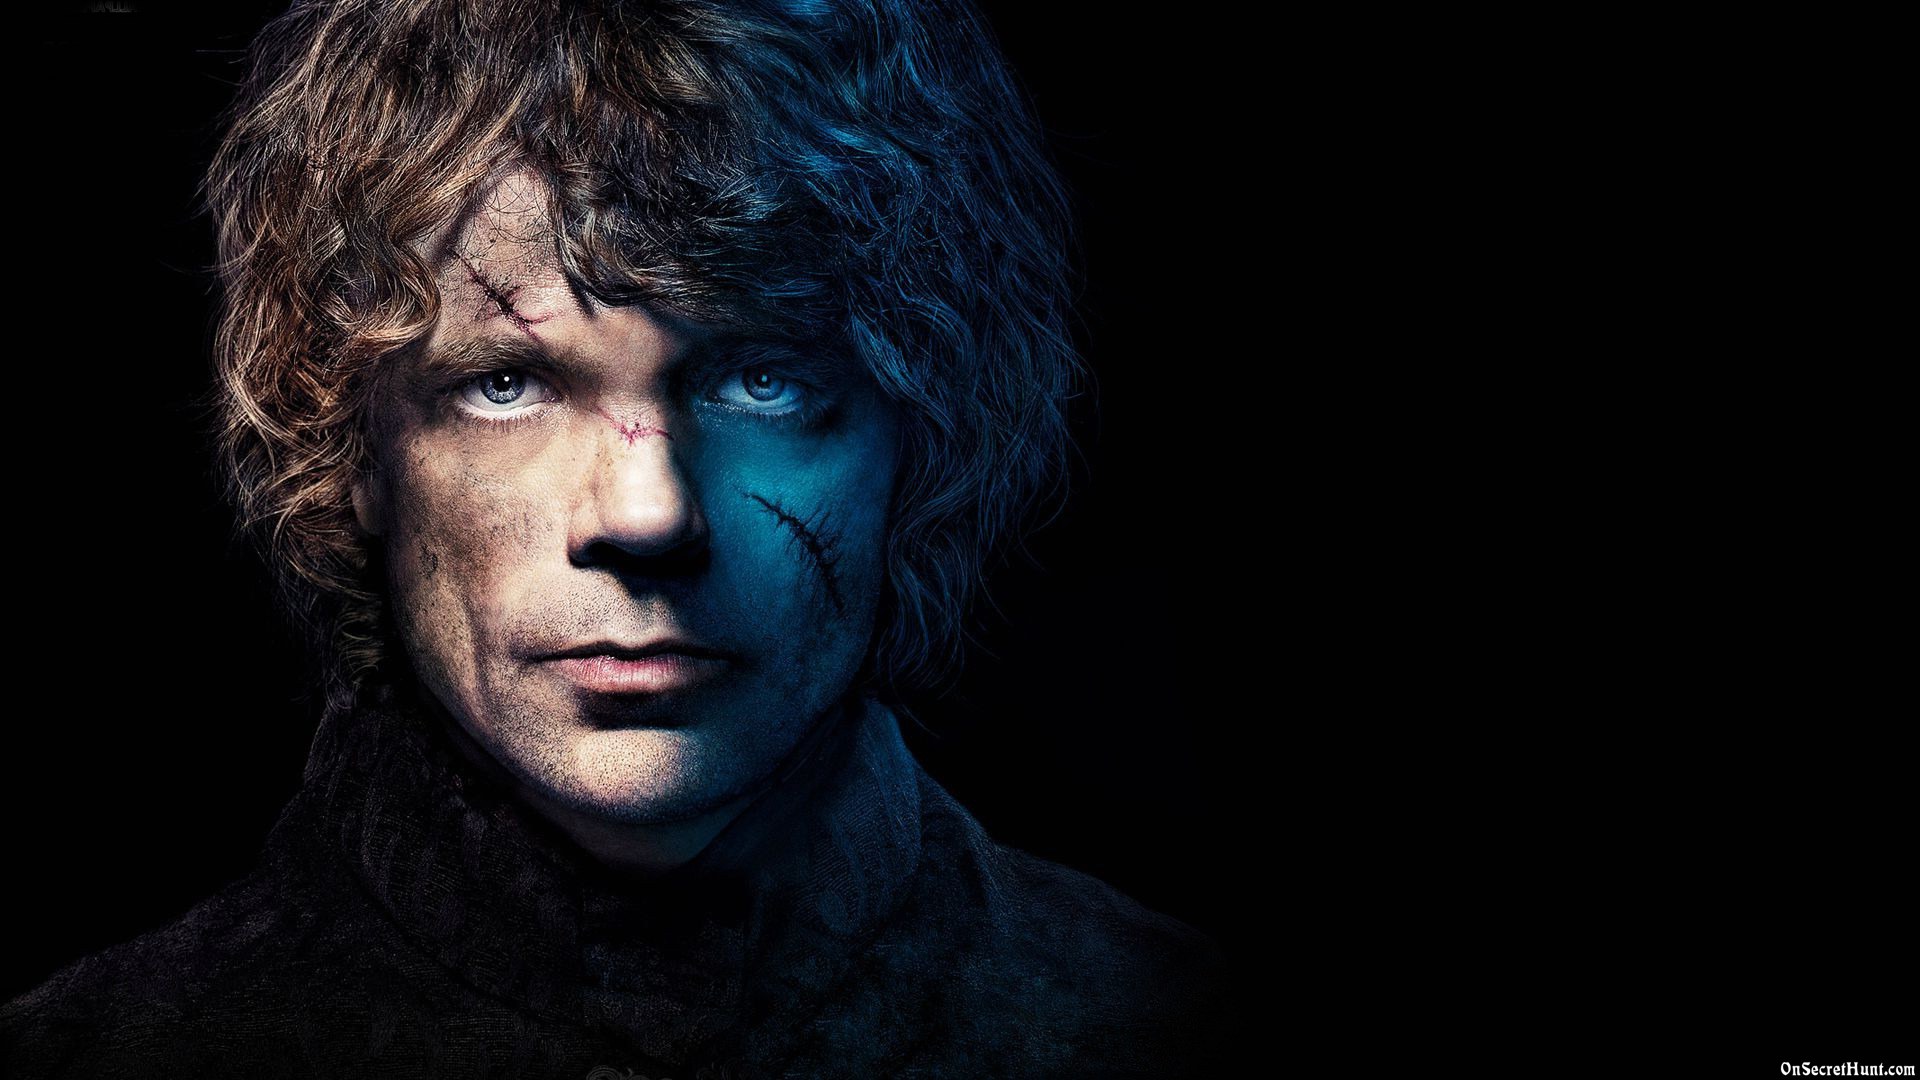 Free download tyrion lannister game of thrones wallpapers game of